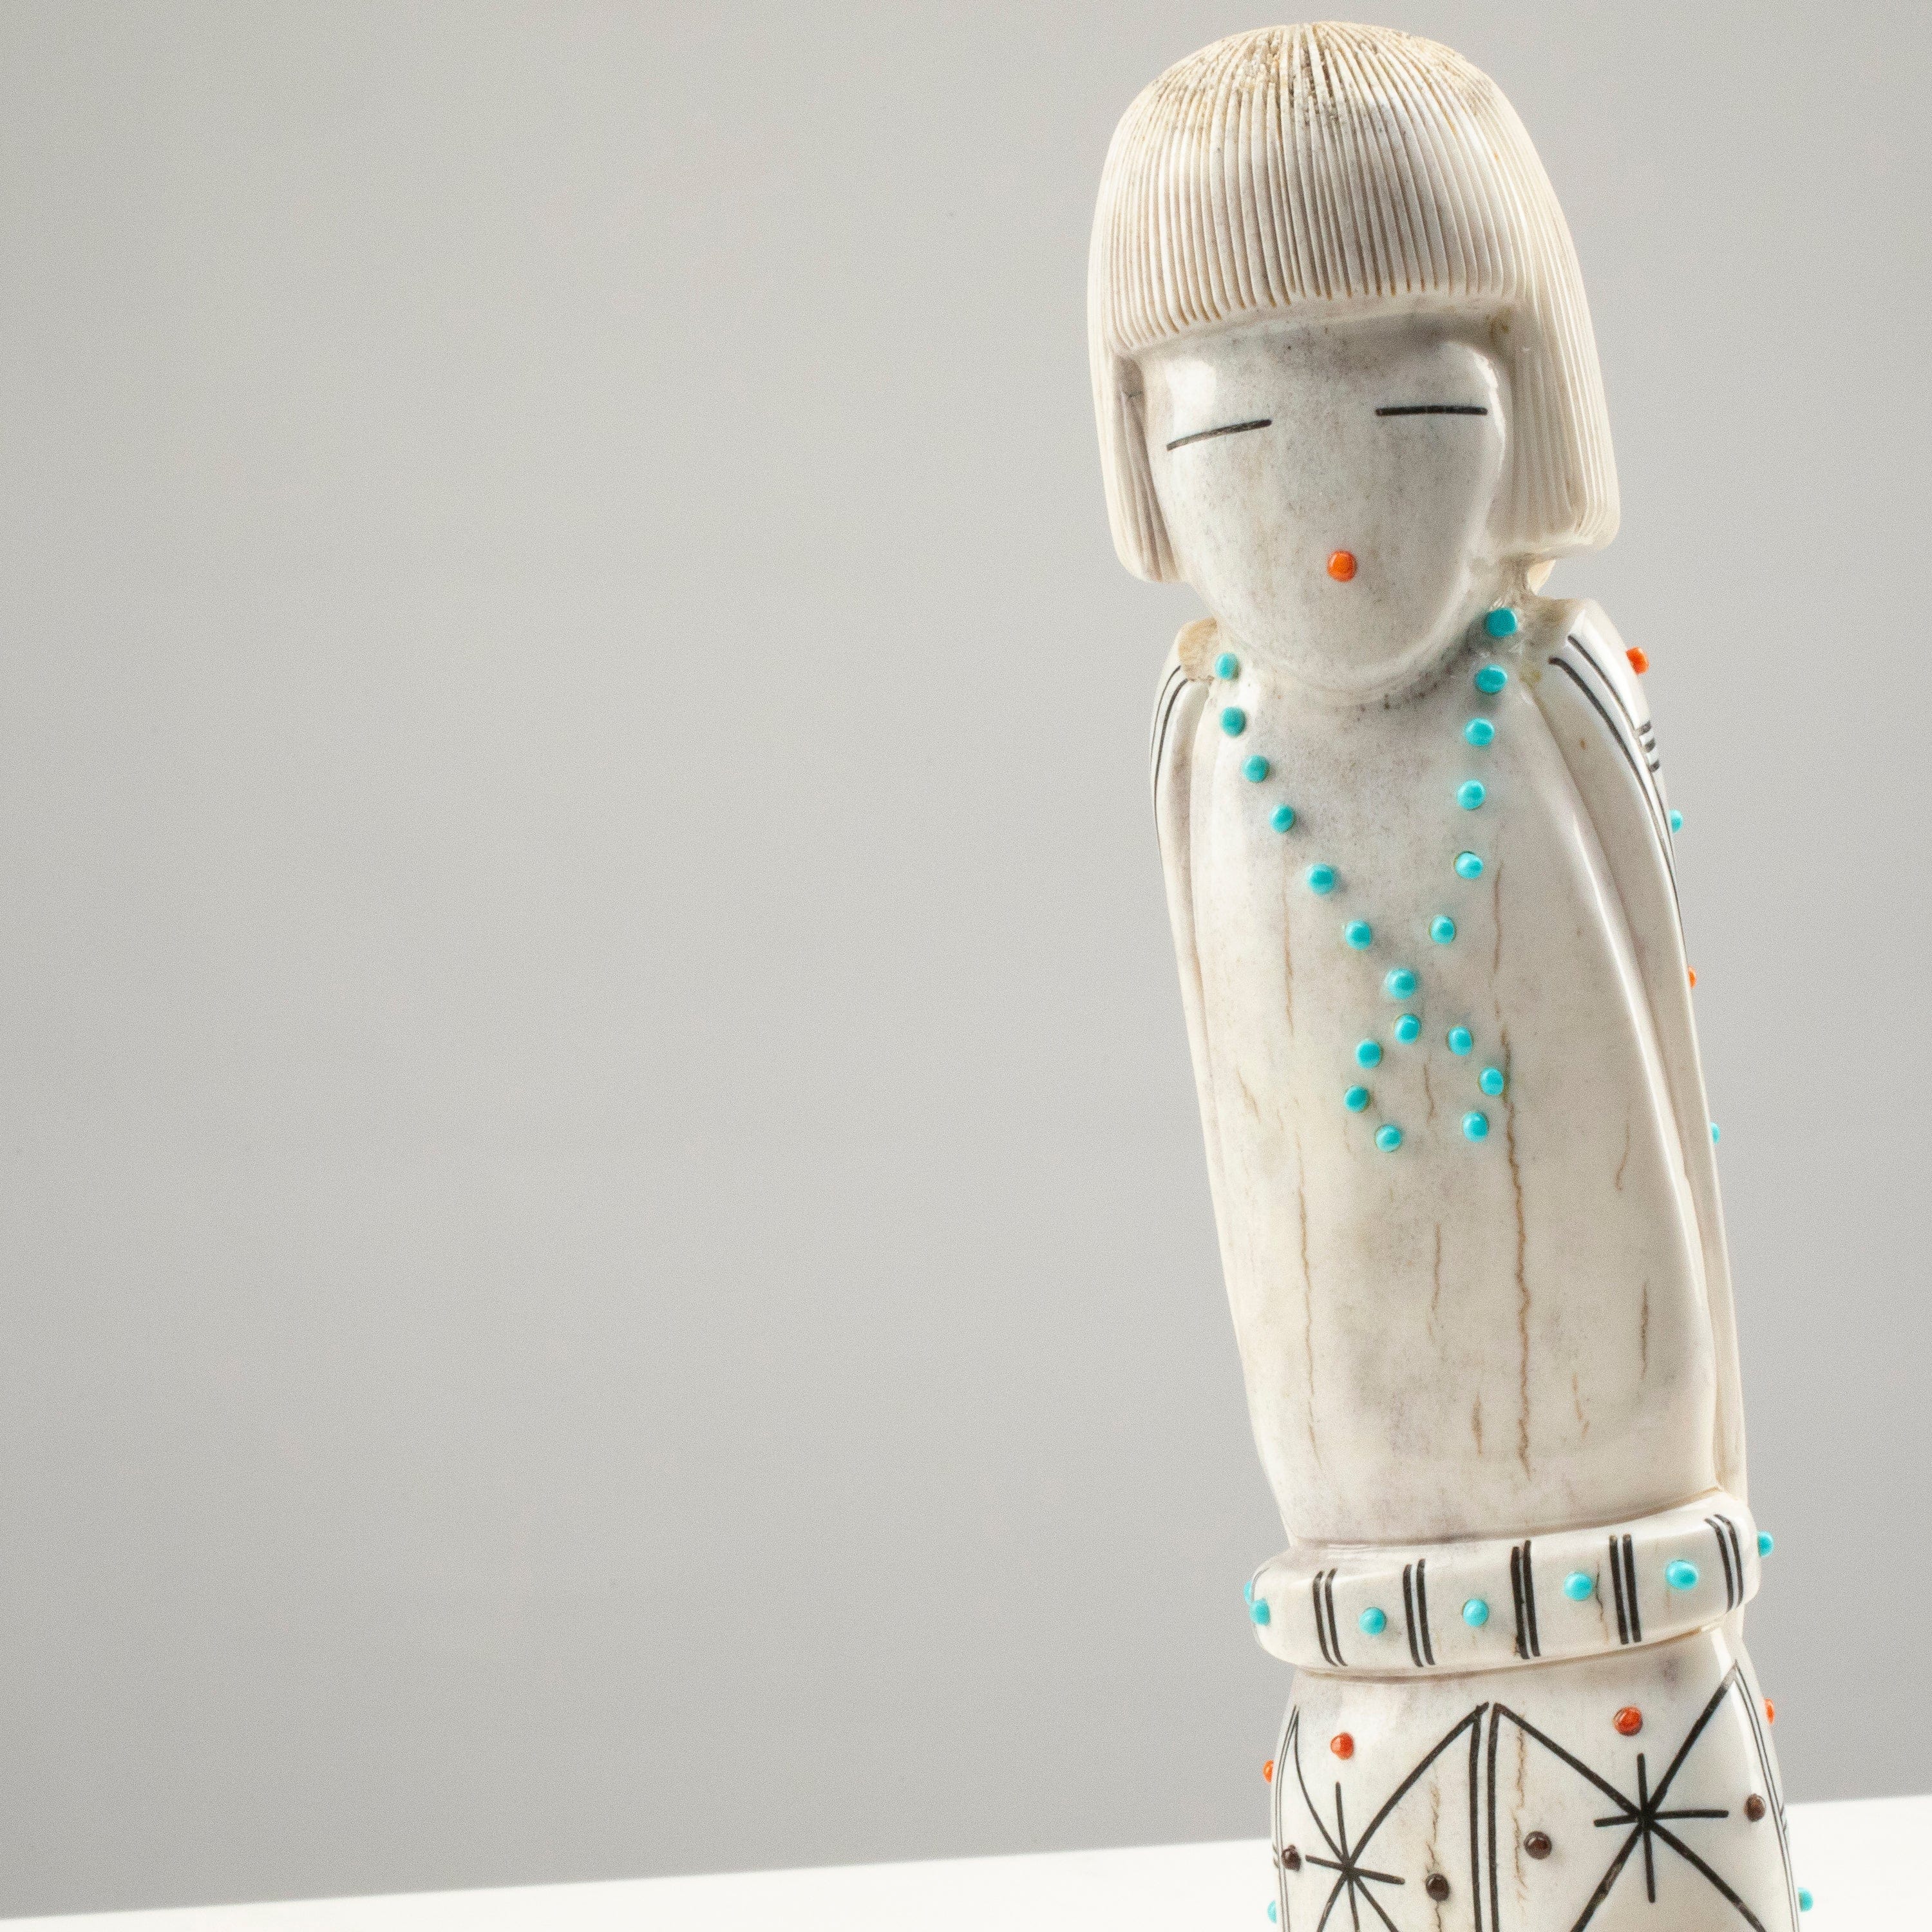 Kalifano Native American Fetish Carvings Claudia Peina Serpentine with Turquoise & Coral Handmade Zuni Maiden Fetish Carving NAC2980.002